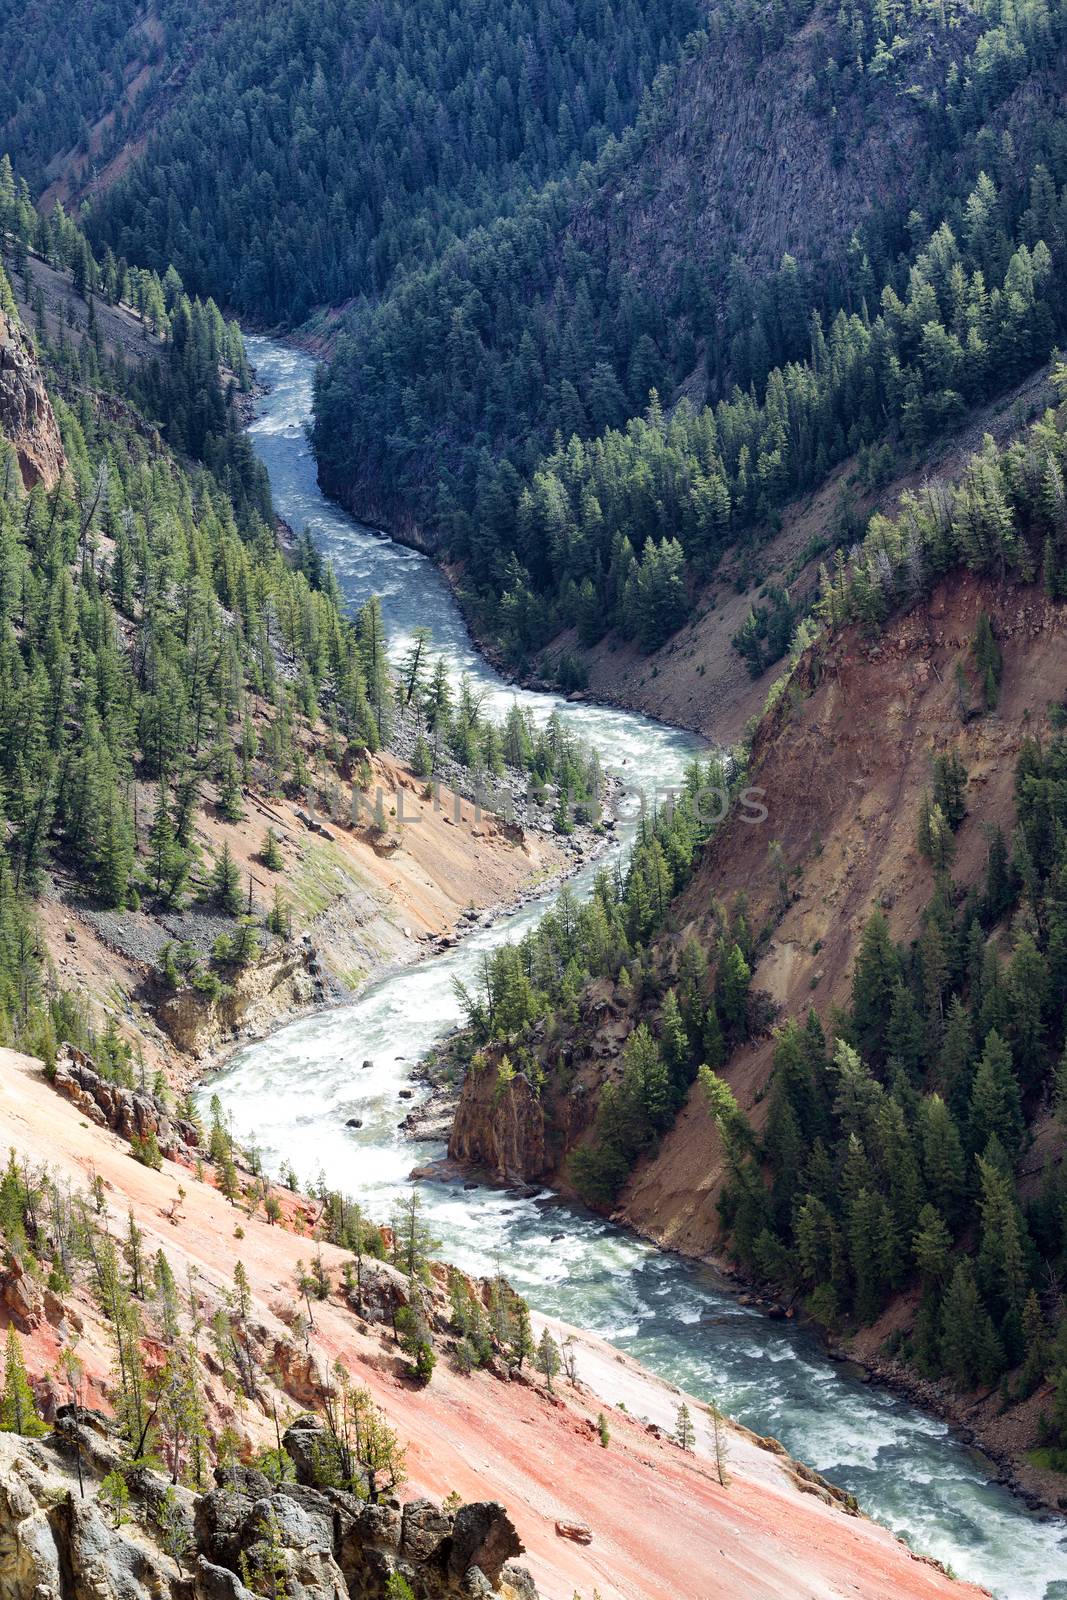 Yellowstone River winding through its canyon on a late summer da by tab1962